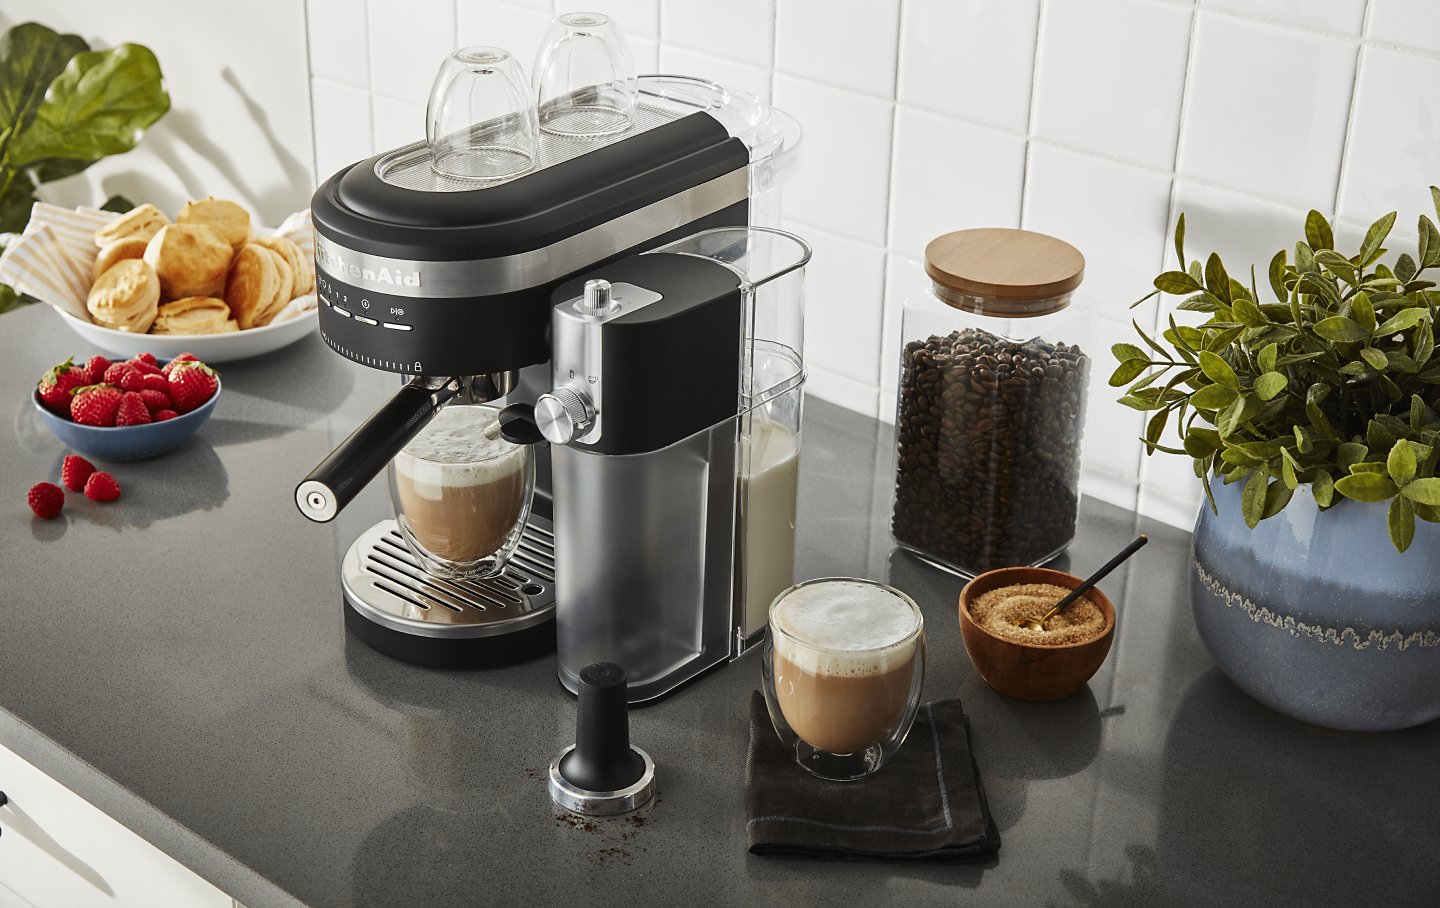 https://kitchenaid-h.assetsadobe.com/is/image/content/dam/business-unit/kitchenaid/en-us/marketing-content/site-assets/page-content/pinch-of-help/how-to-clean-a-milk-frother/Milk-Frother_Image_1.png?fmt=png-alpha&qlt=85,0&resMode=sharp2&op_usm=1.75,0.3,2,0&scl=1&constrain=fit,1